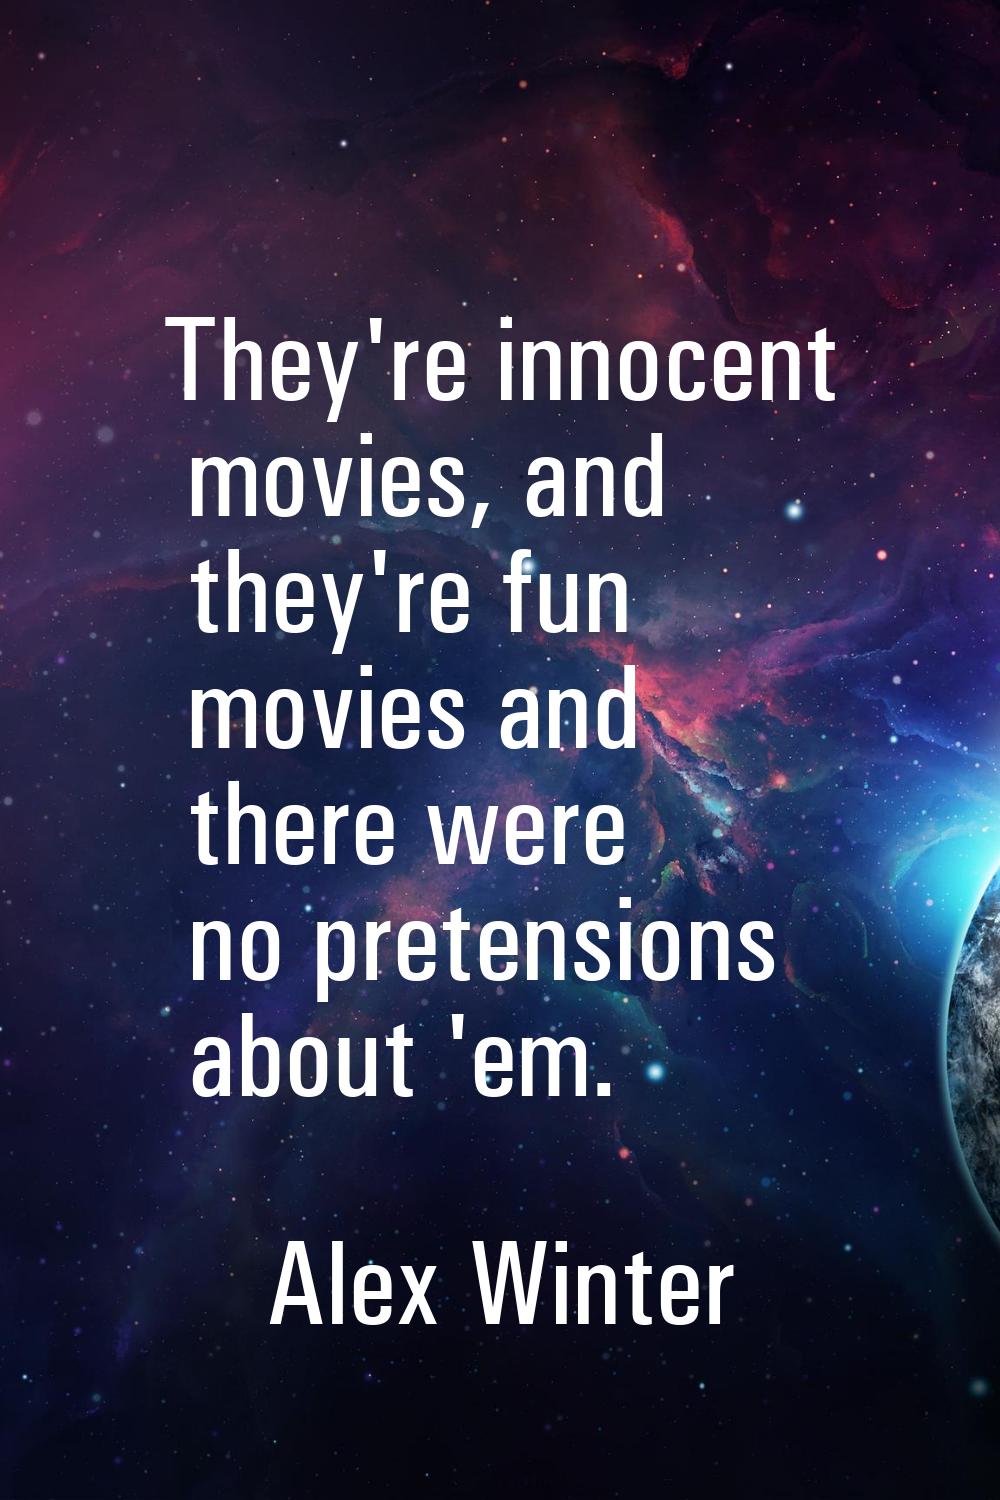 They're innocent movies, and they're fun movies and there were no pretensions about 'em.